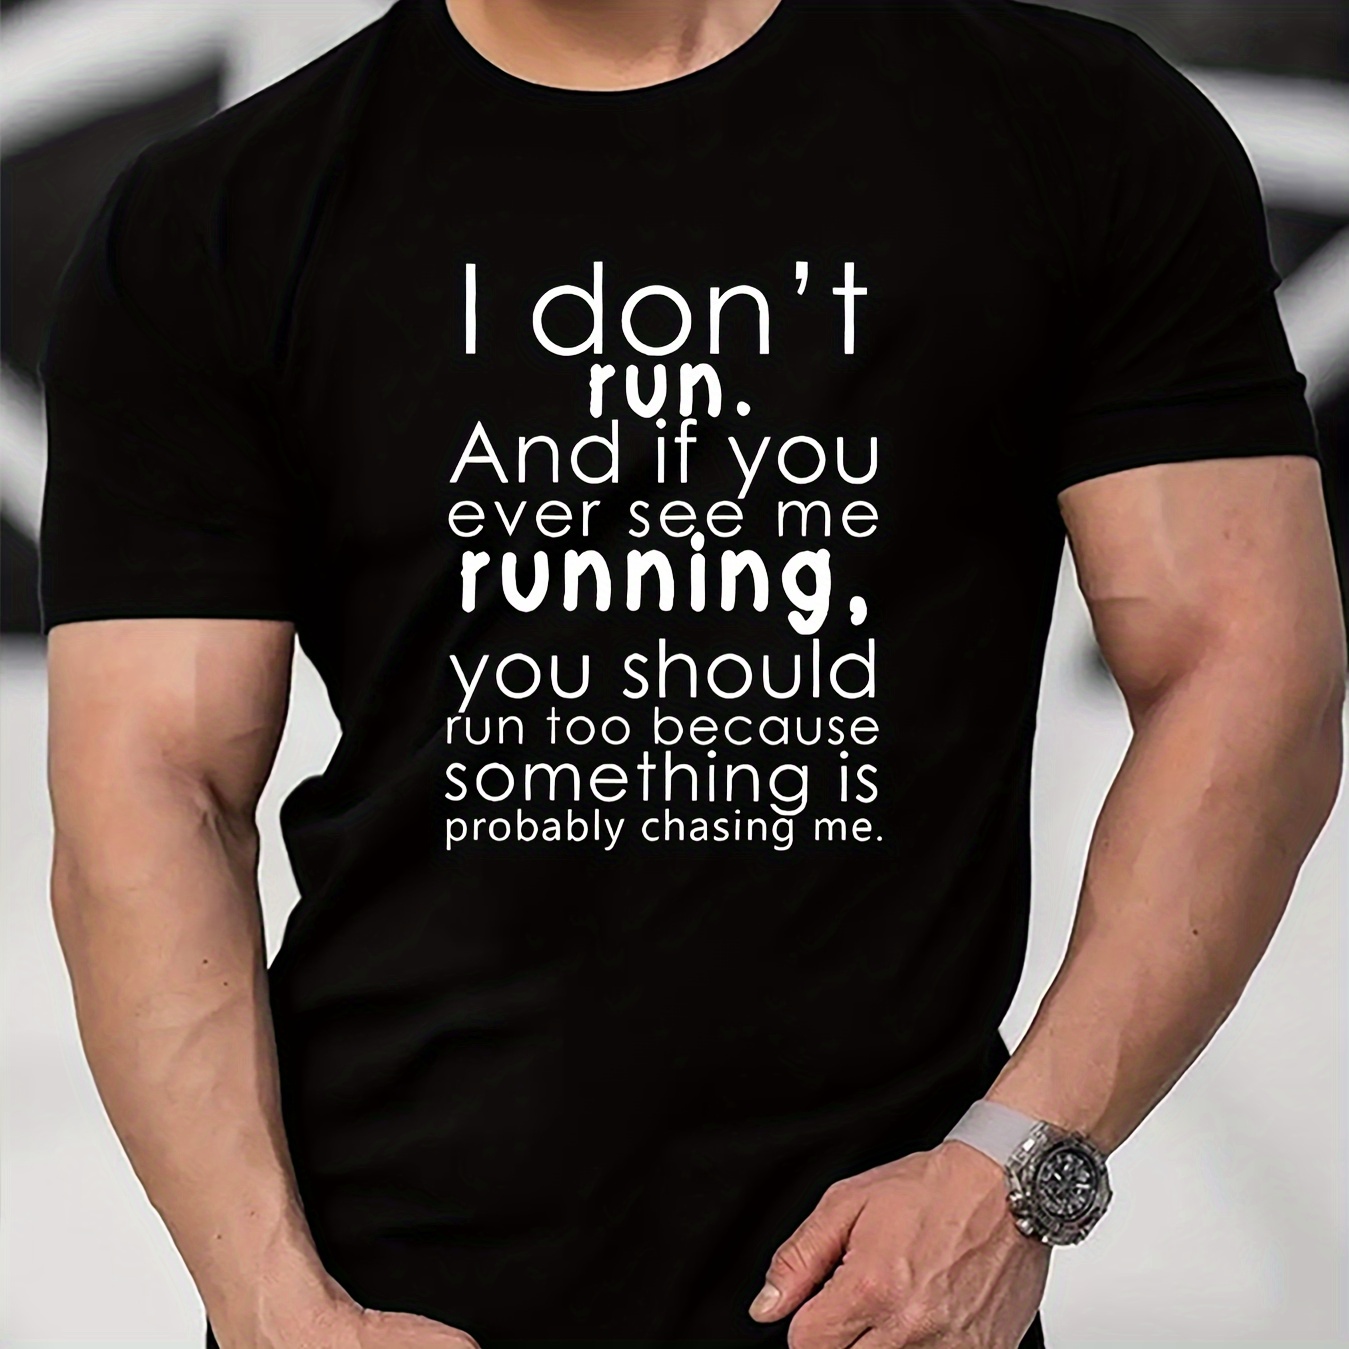 

If You Ever See Me Running Print T Shirt, Tees For Men, Casual Short Sleeve T-shirt For Summer